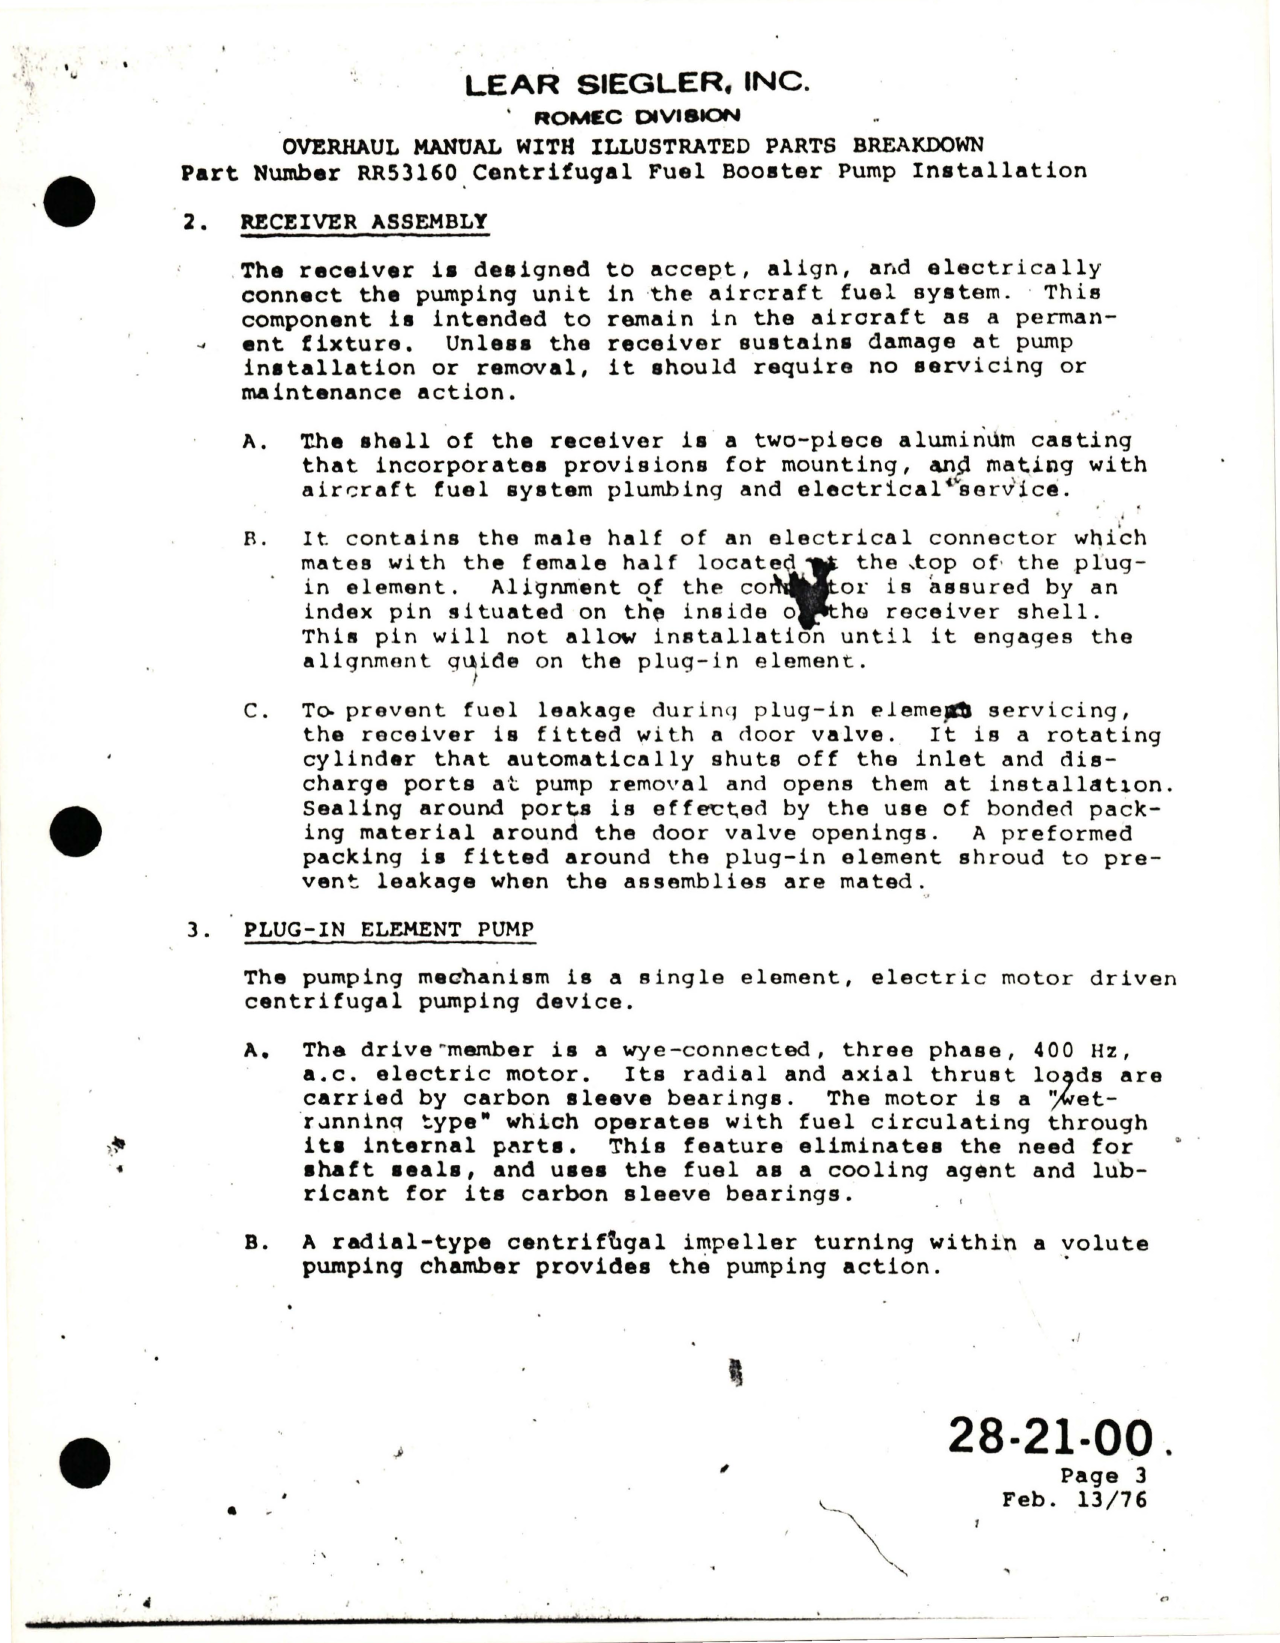 Sample page 8 from AirCorps Library document: Maintenance Manual for Centrifugal Fuel Booster Pump Installation - Series RR53160 